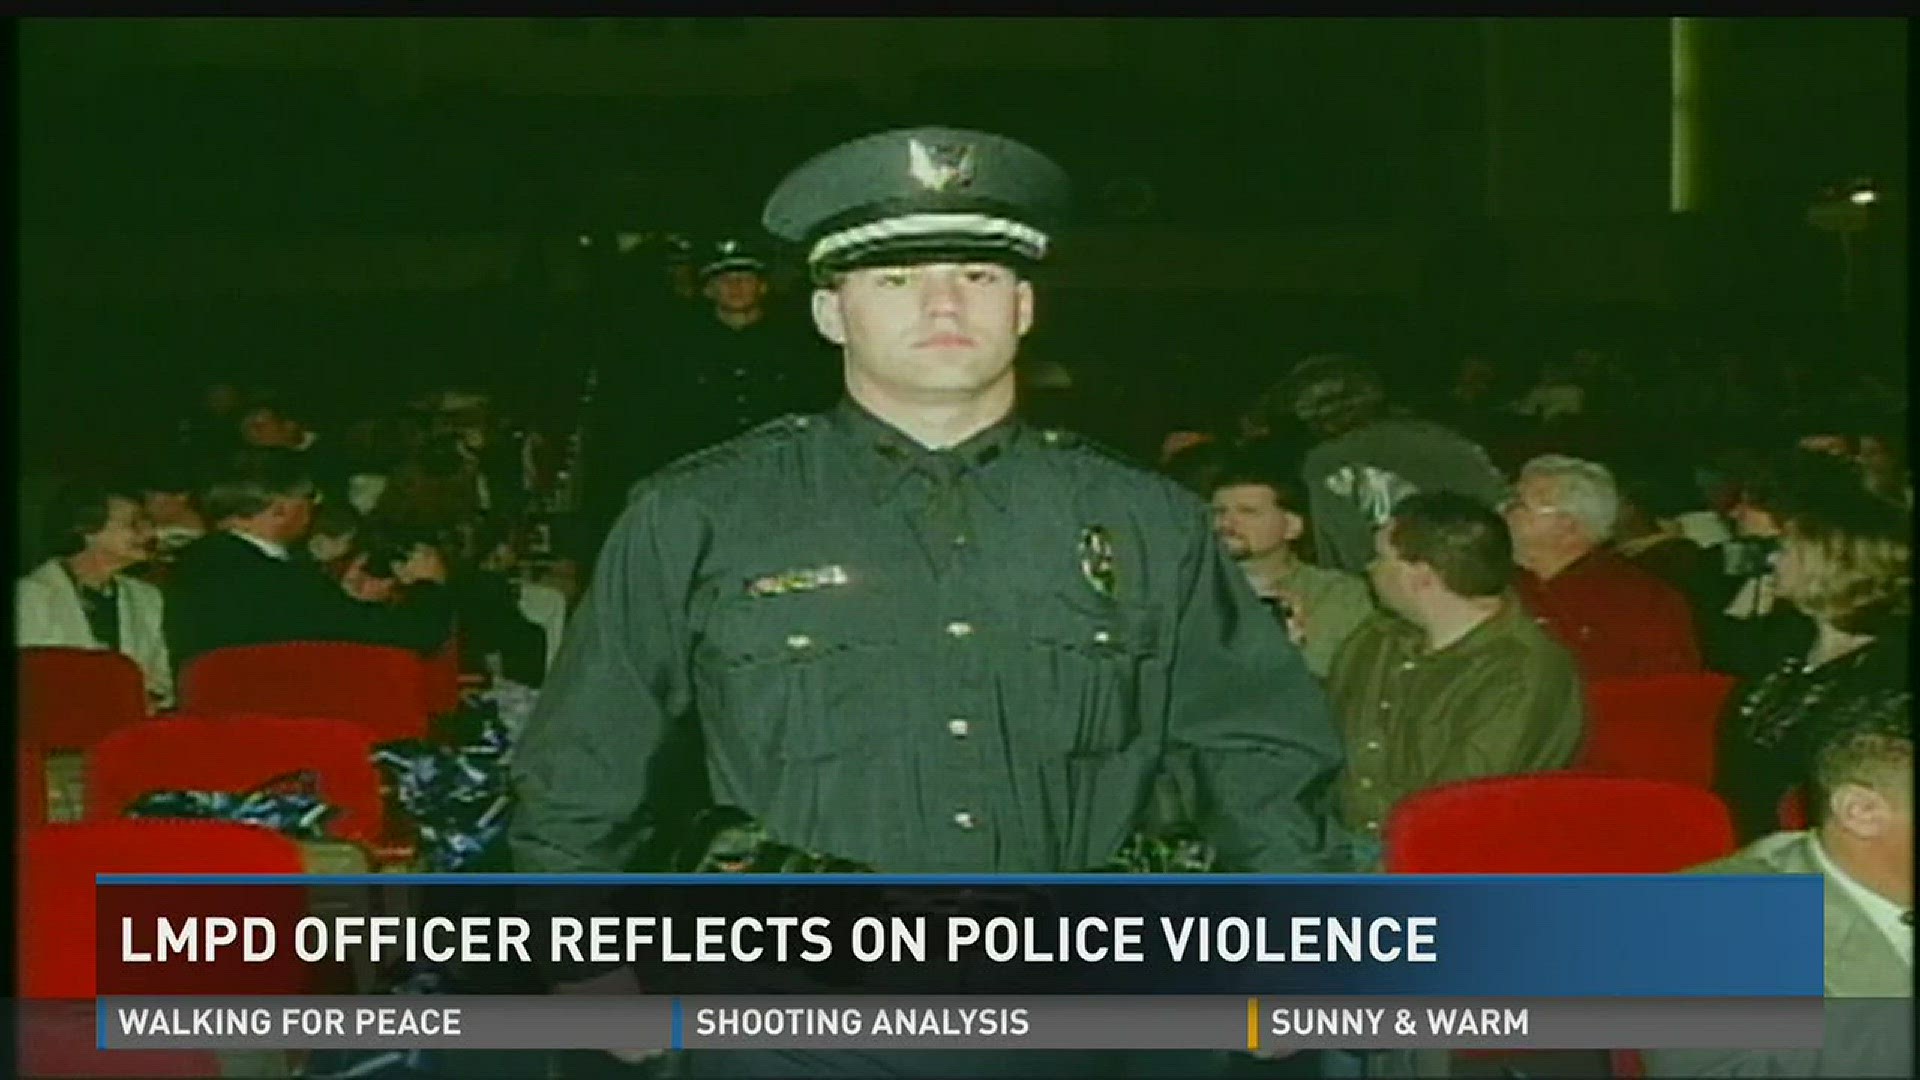 LMPD officer reflects on police violence